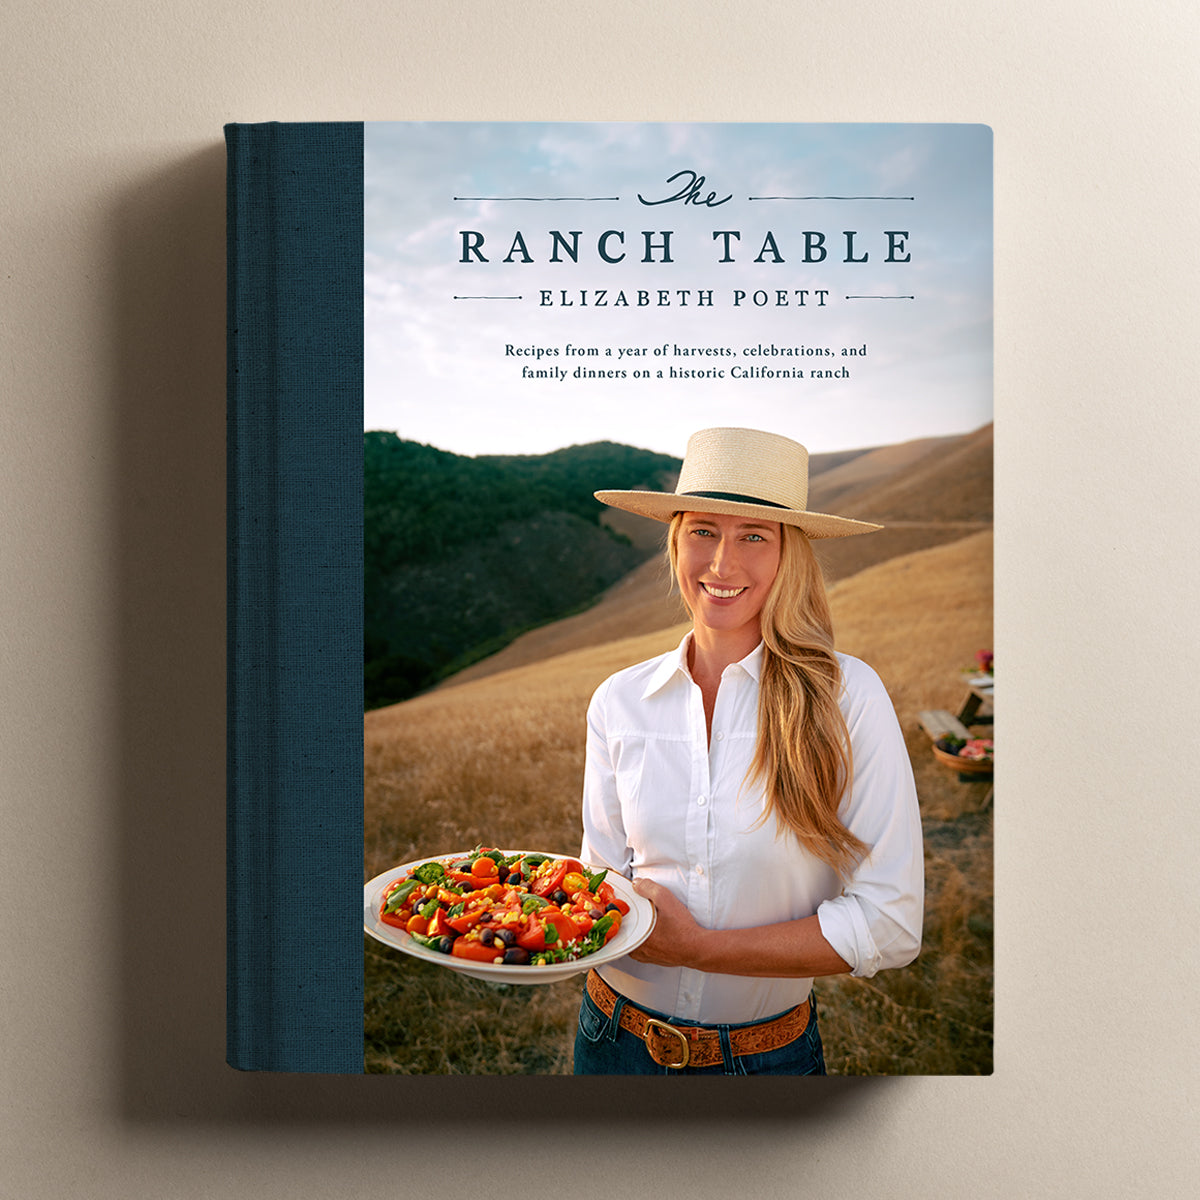 The Ranch Table On sale for $32.00, discounted from $40.00